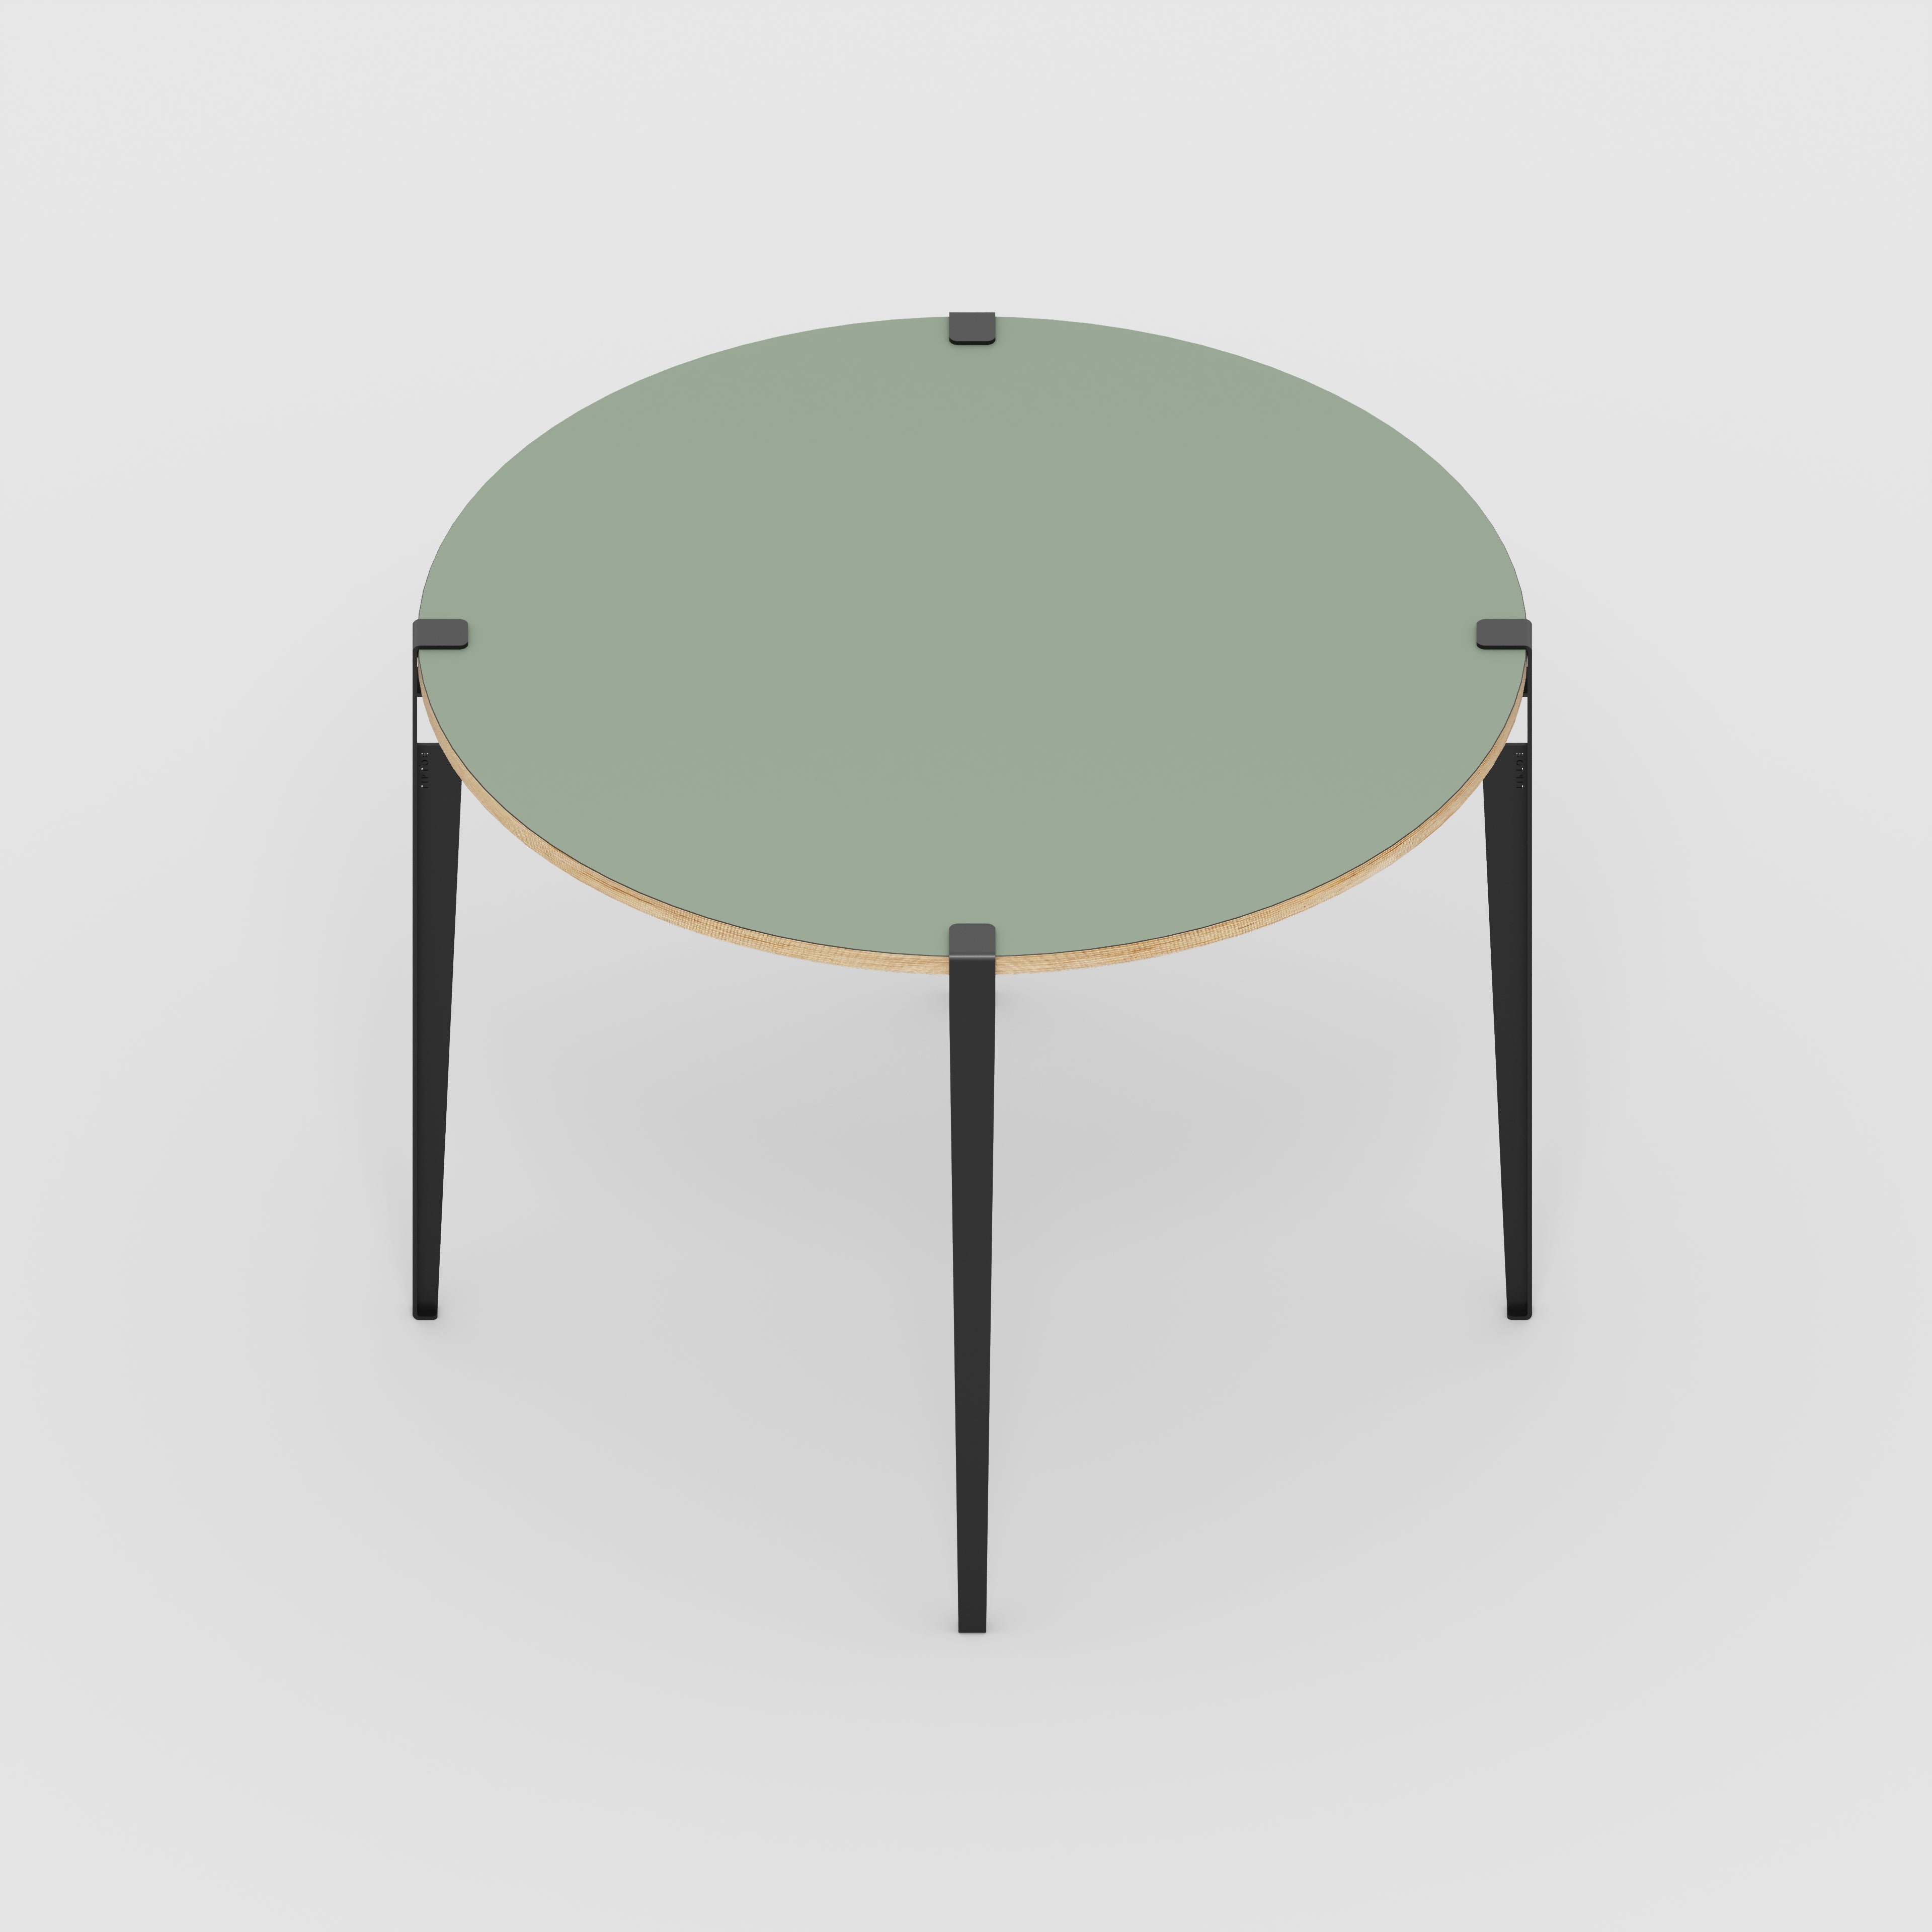 Round Table with Black Tiptoe Legs - Formica Green Slate - 1200(dia) x 900(h)